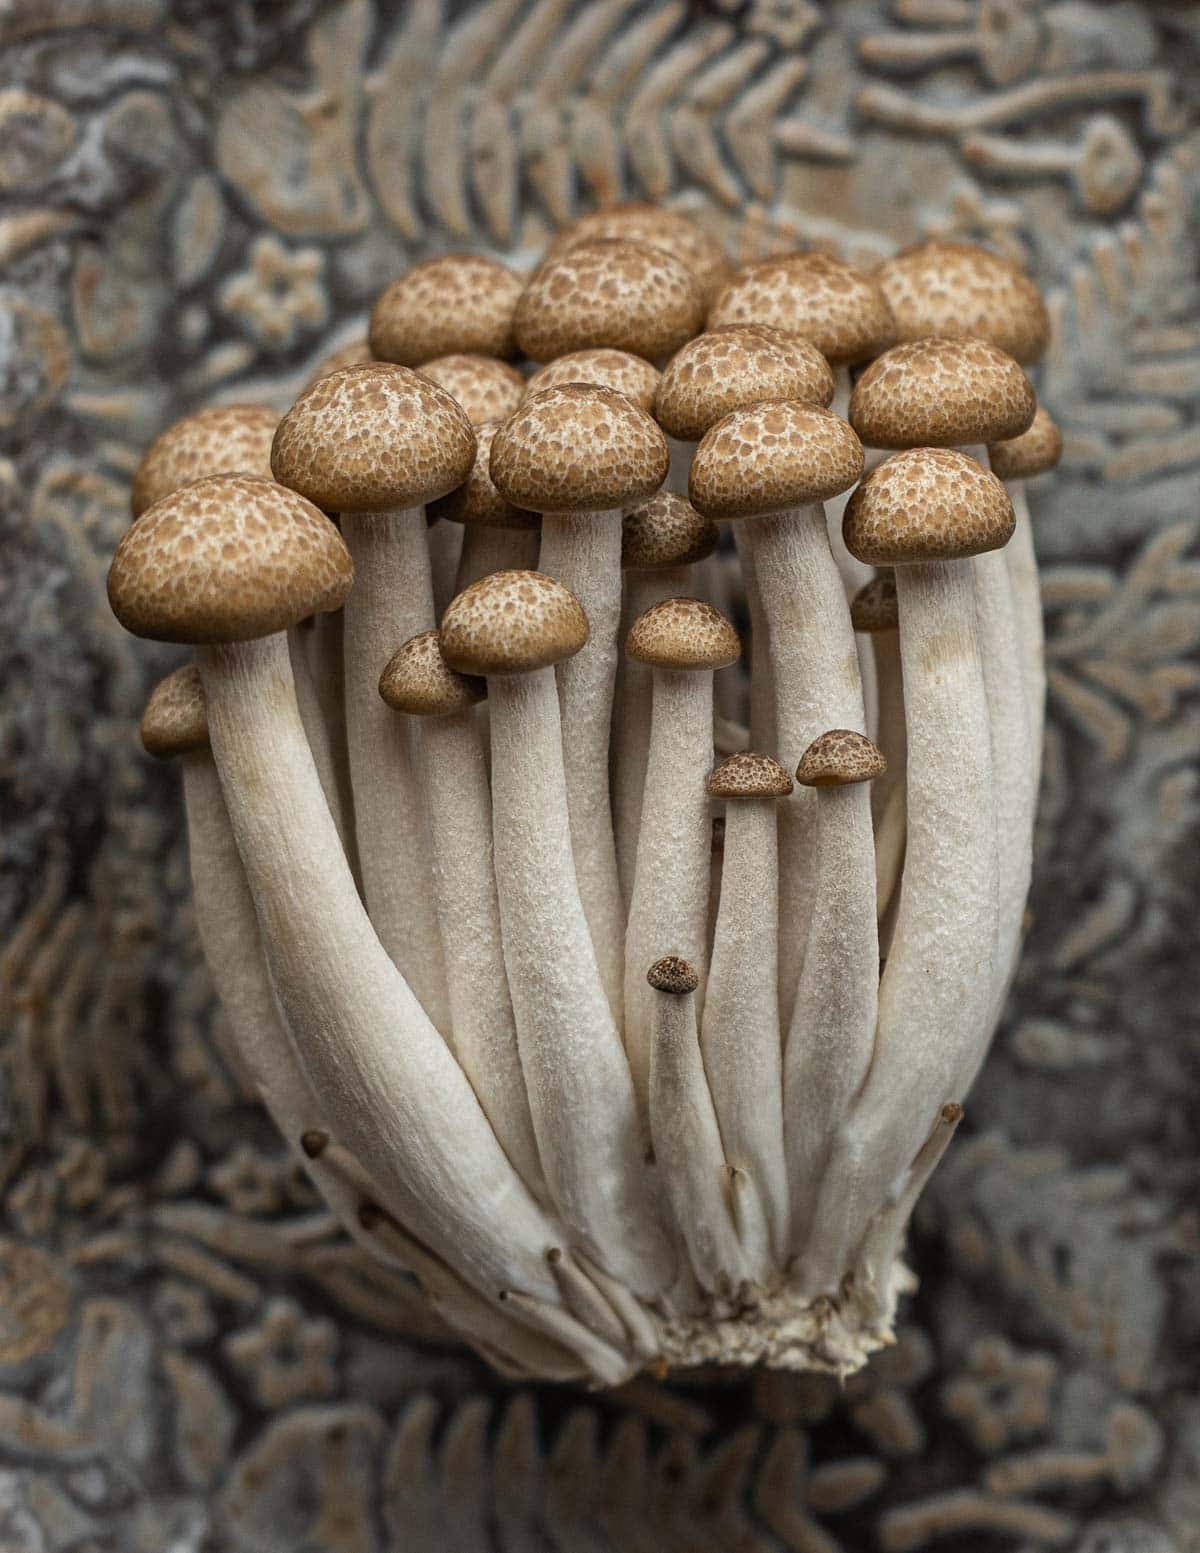 A close up image of a cluster of beech mushrooms or shimeji mushrooms on a ceramic plate. 